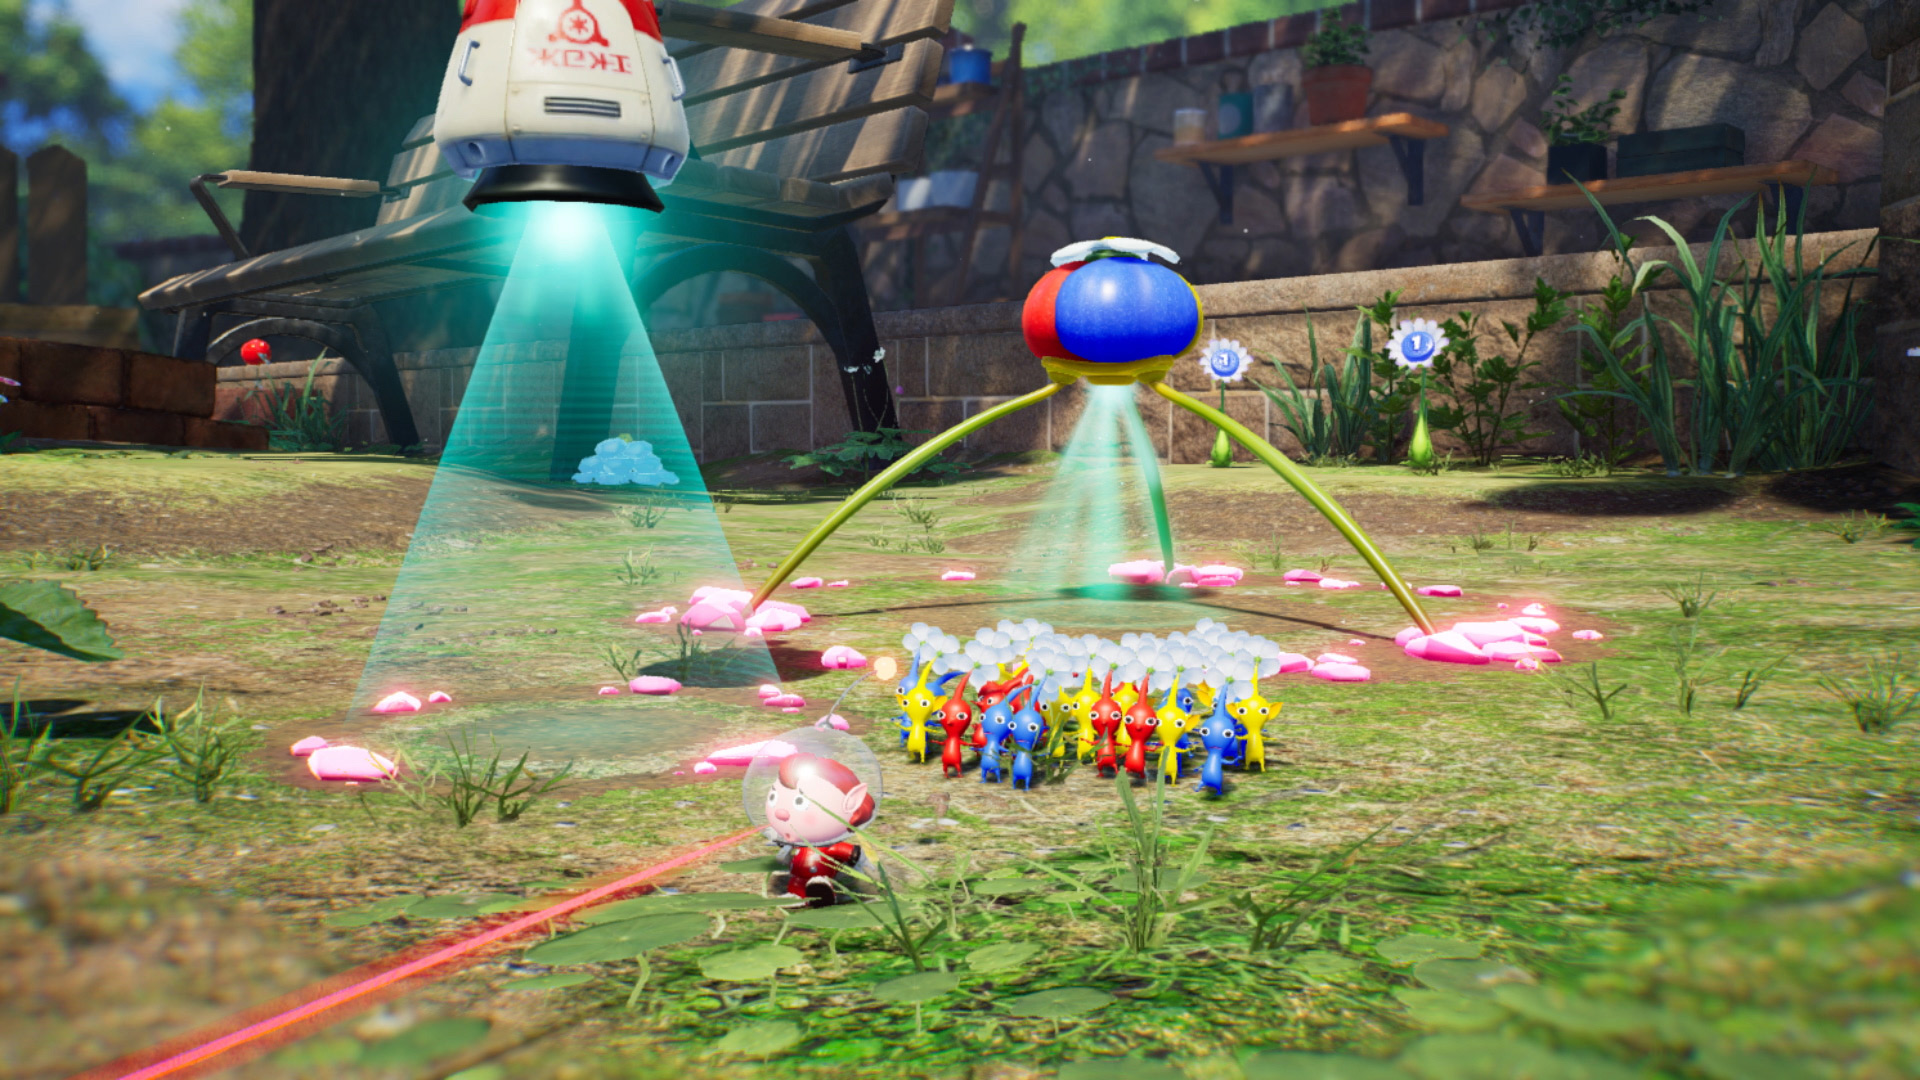 Pikmin 4 launches on July 21, exclusively on the Nintendo Switch